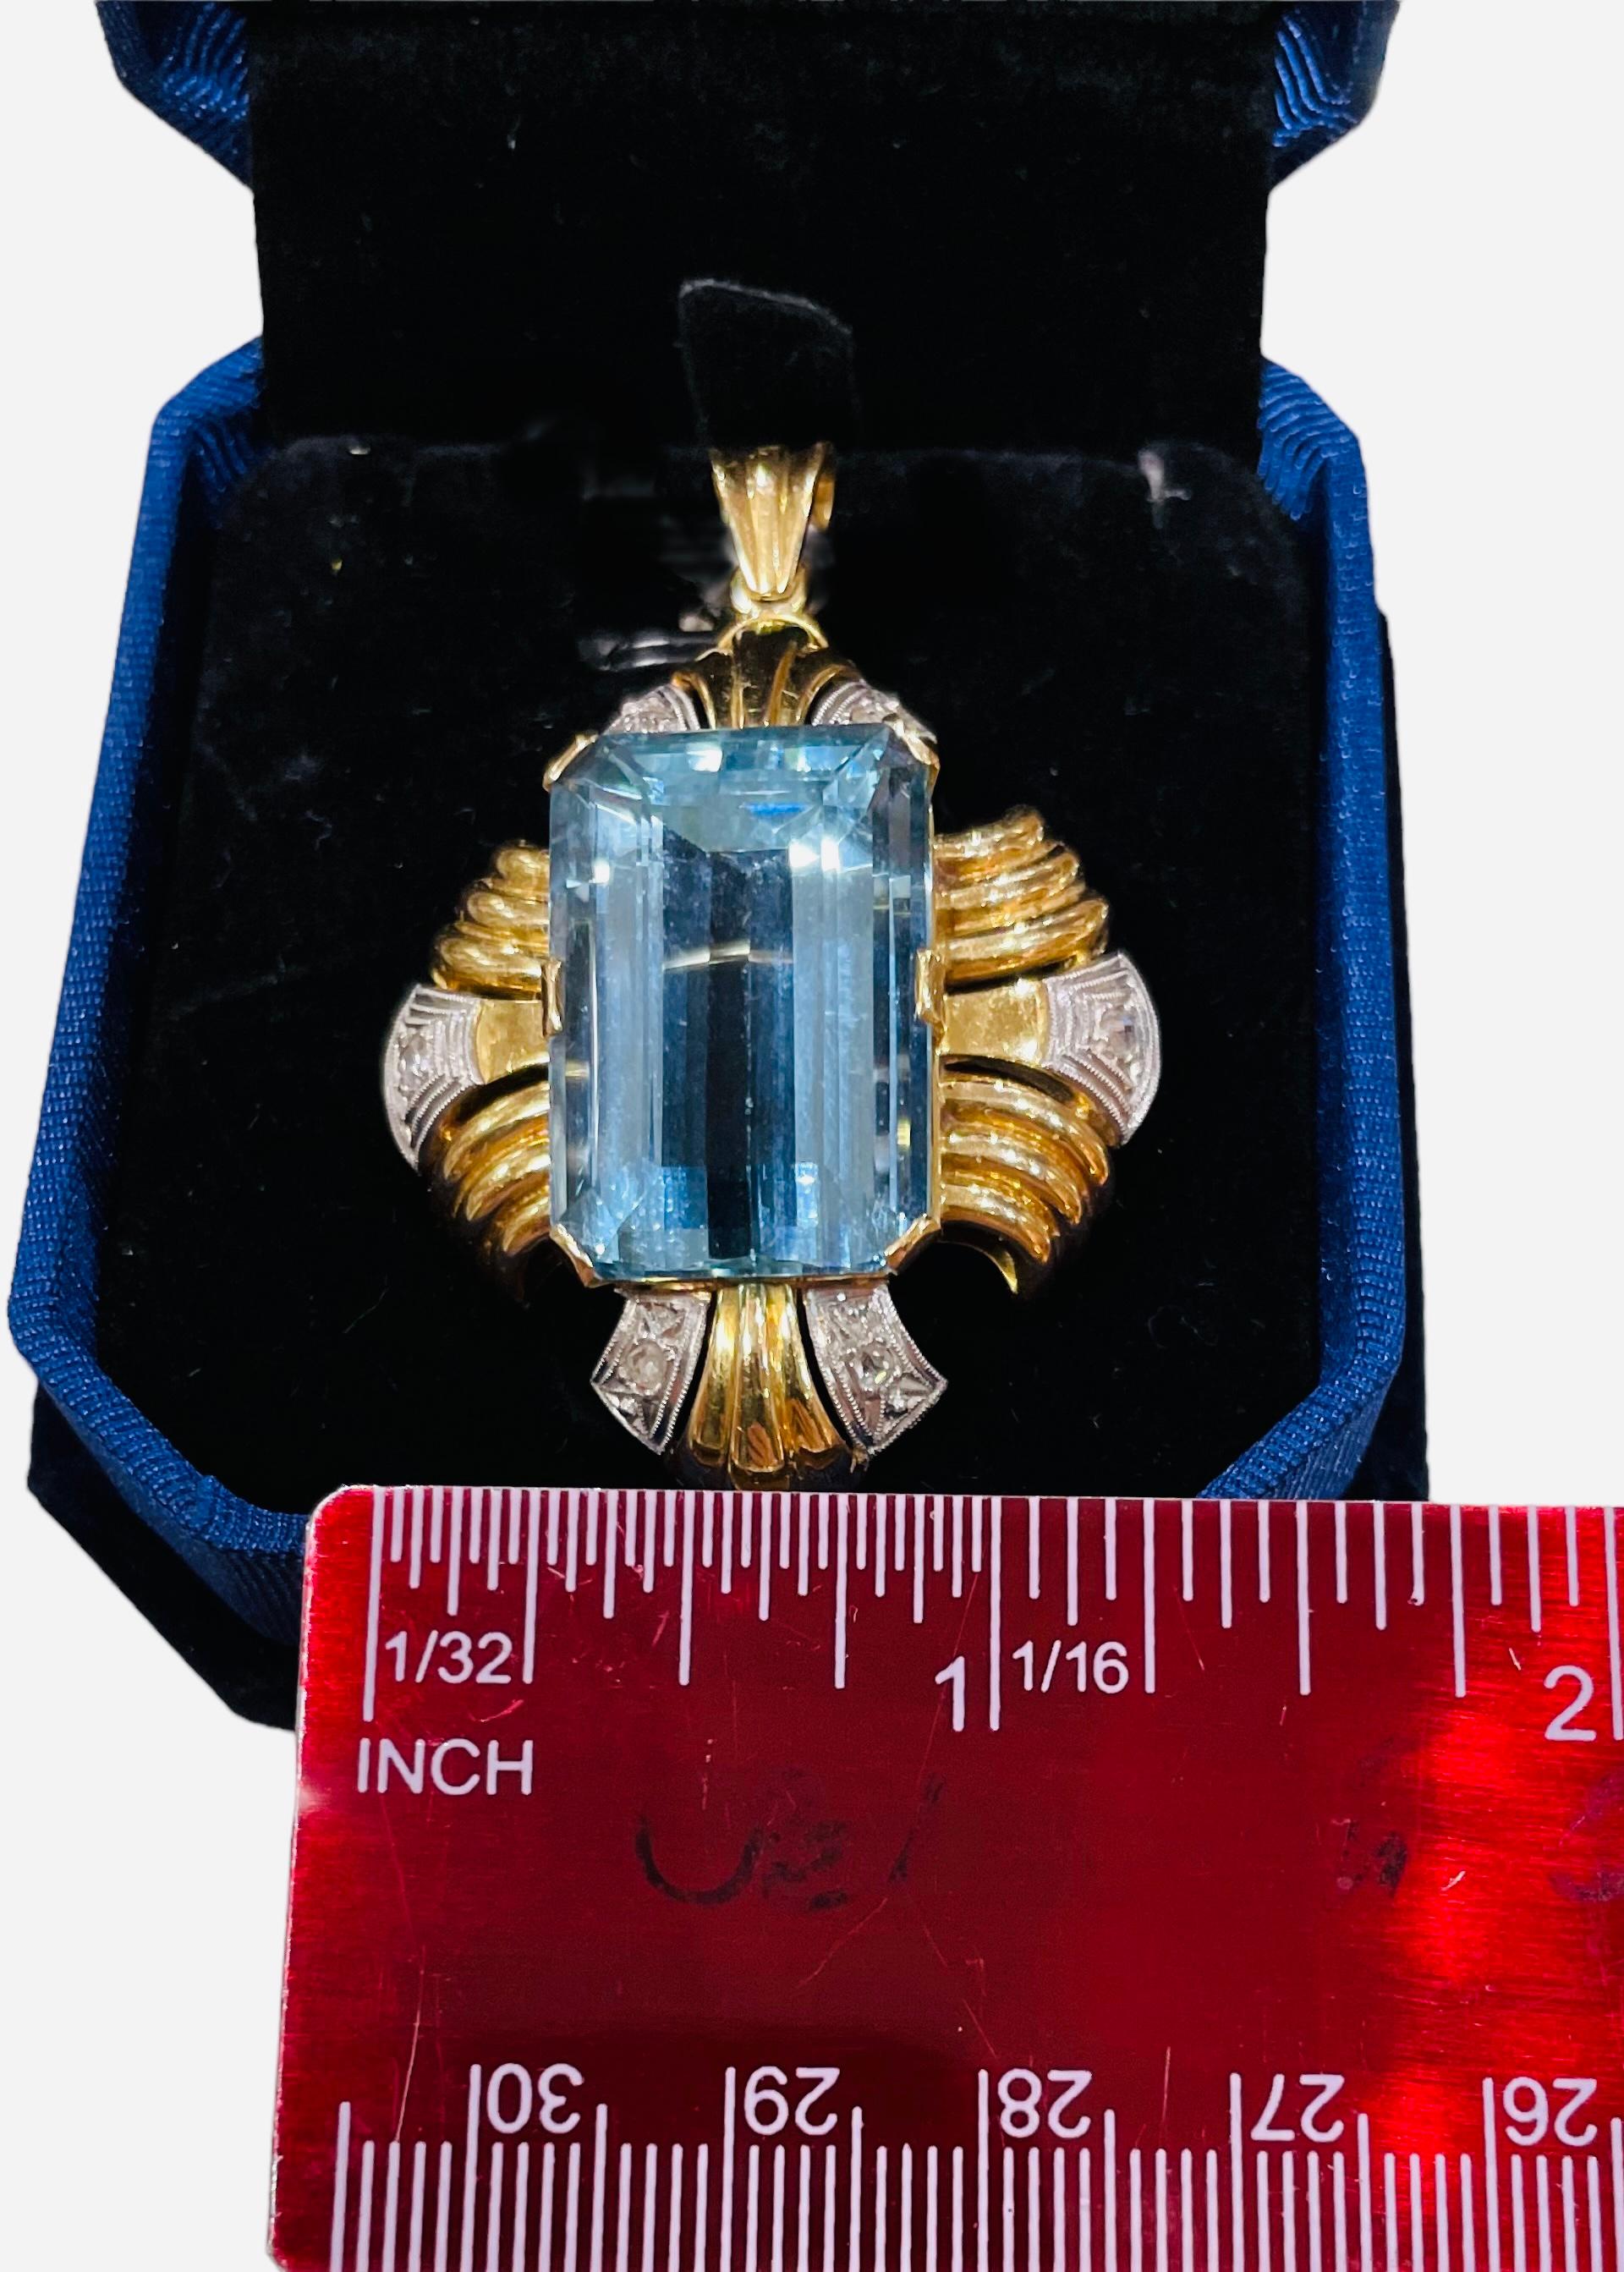 This is an 18K yellow and white gold aquamarine and diamonds pendant/brooch. It depicts an emerald cut aquamarine of 22.18ct in prong setting in the center. It is adorned with yellow gold Fleur de Lis edge like in addition to two set of triplets